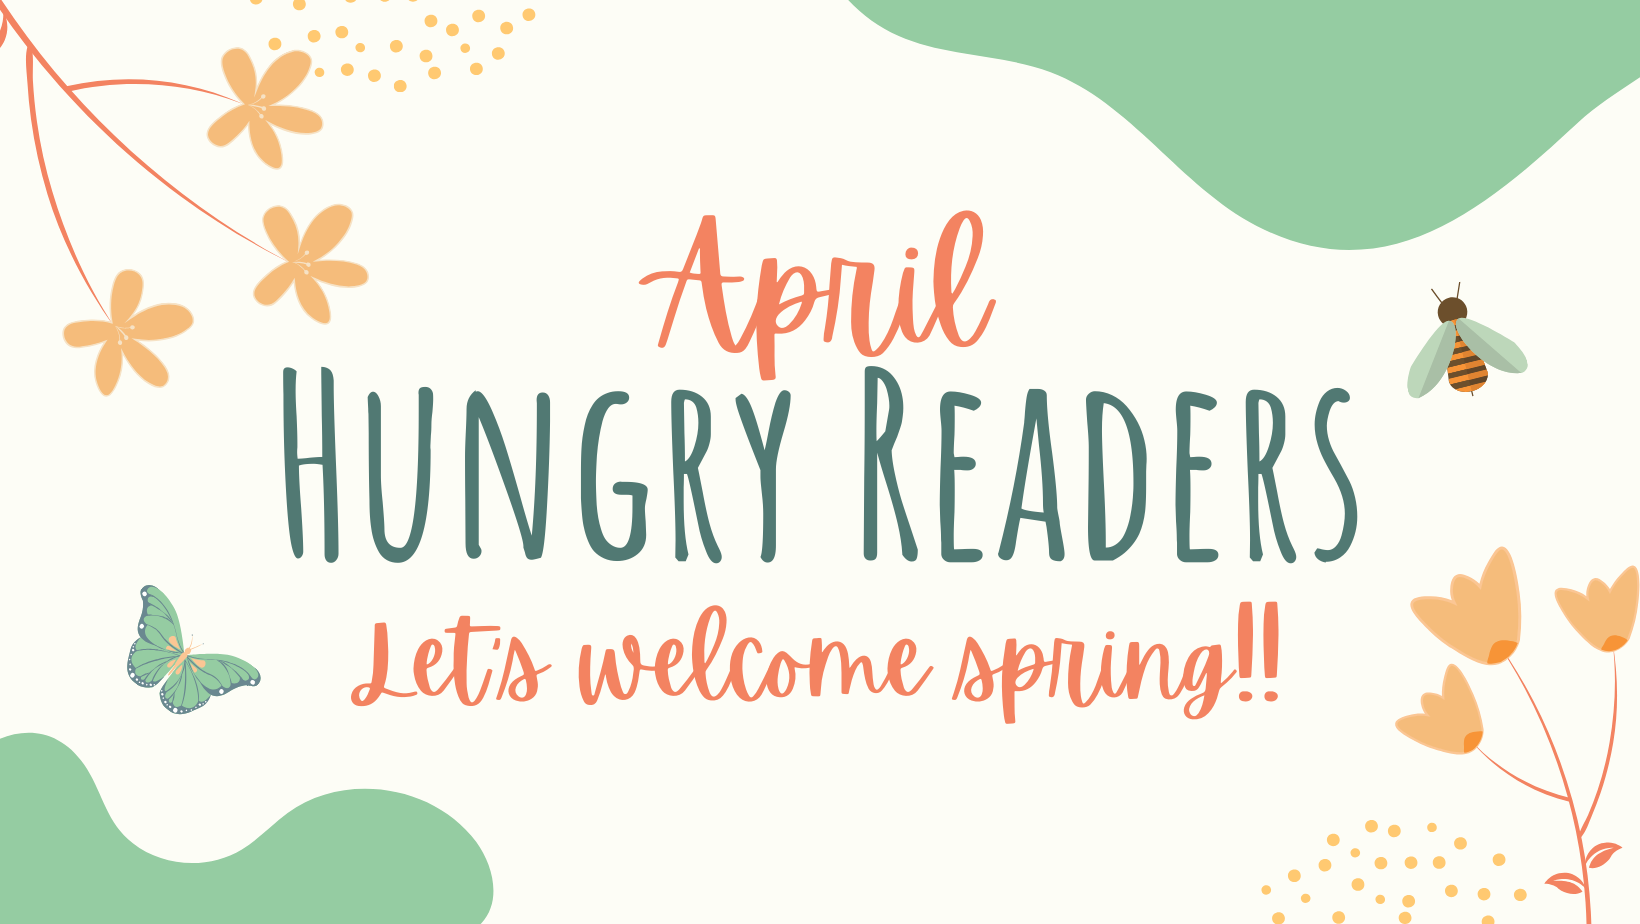 April hungry readers